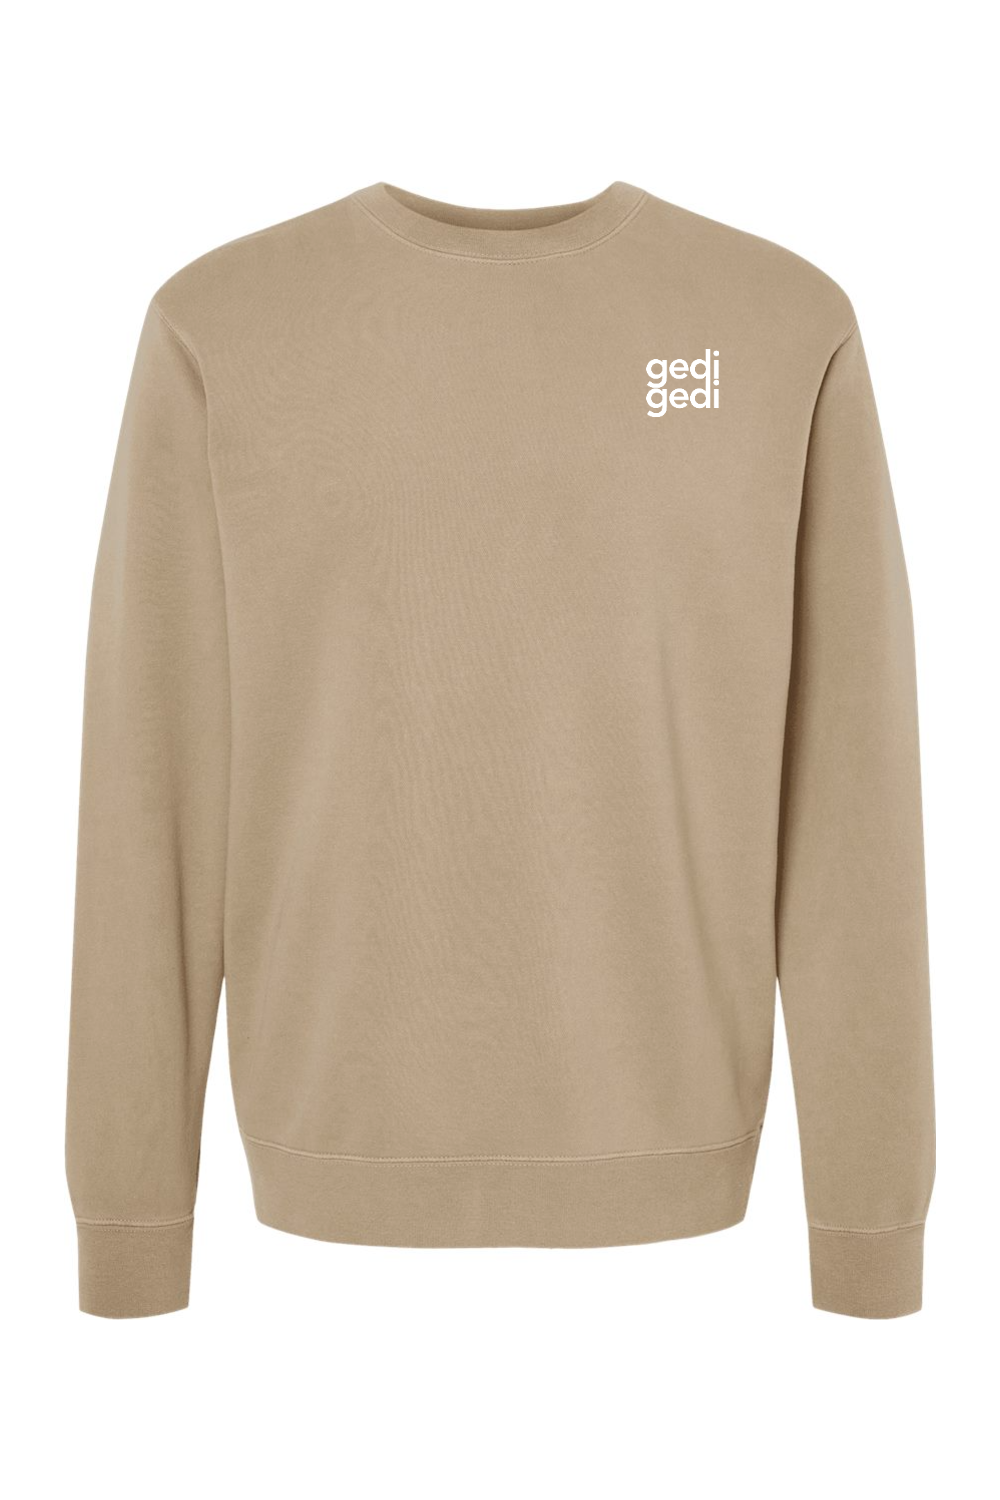 Independent Trading Co. Crewneck